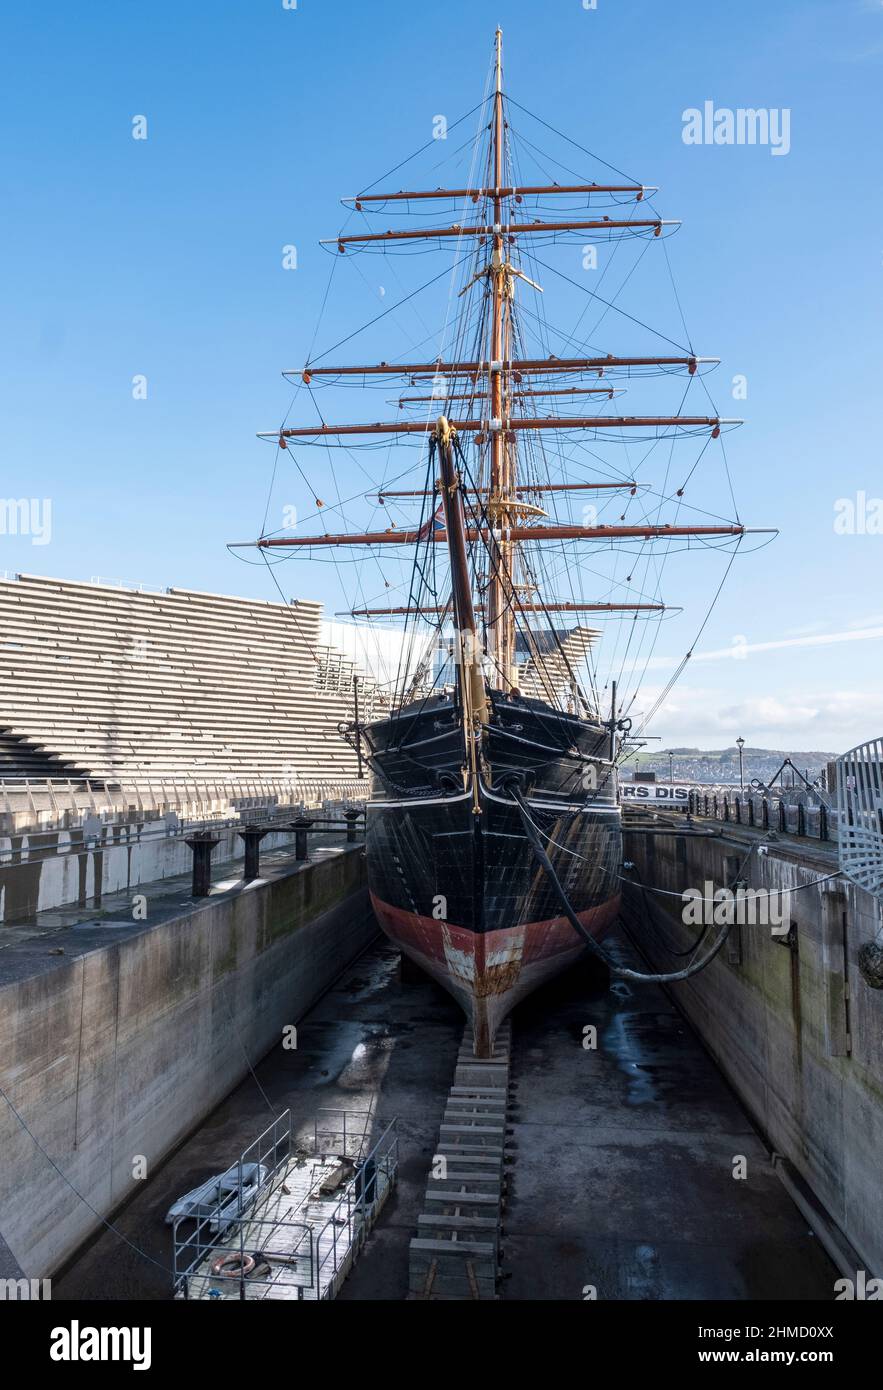 RRS Discovery ship, Discovery Point, Dundee, Scotland. The Discovery was the ship used by Captain Scott during the National Antarctic expedition. Stock Photo